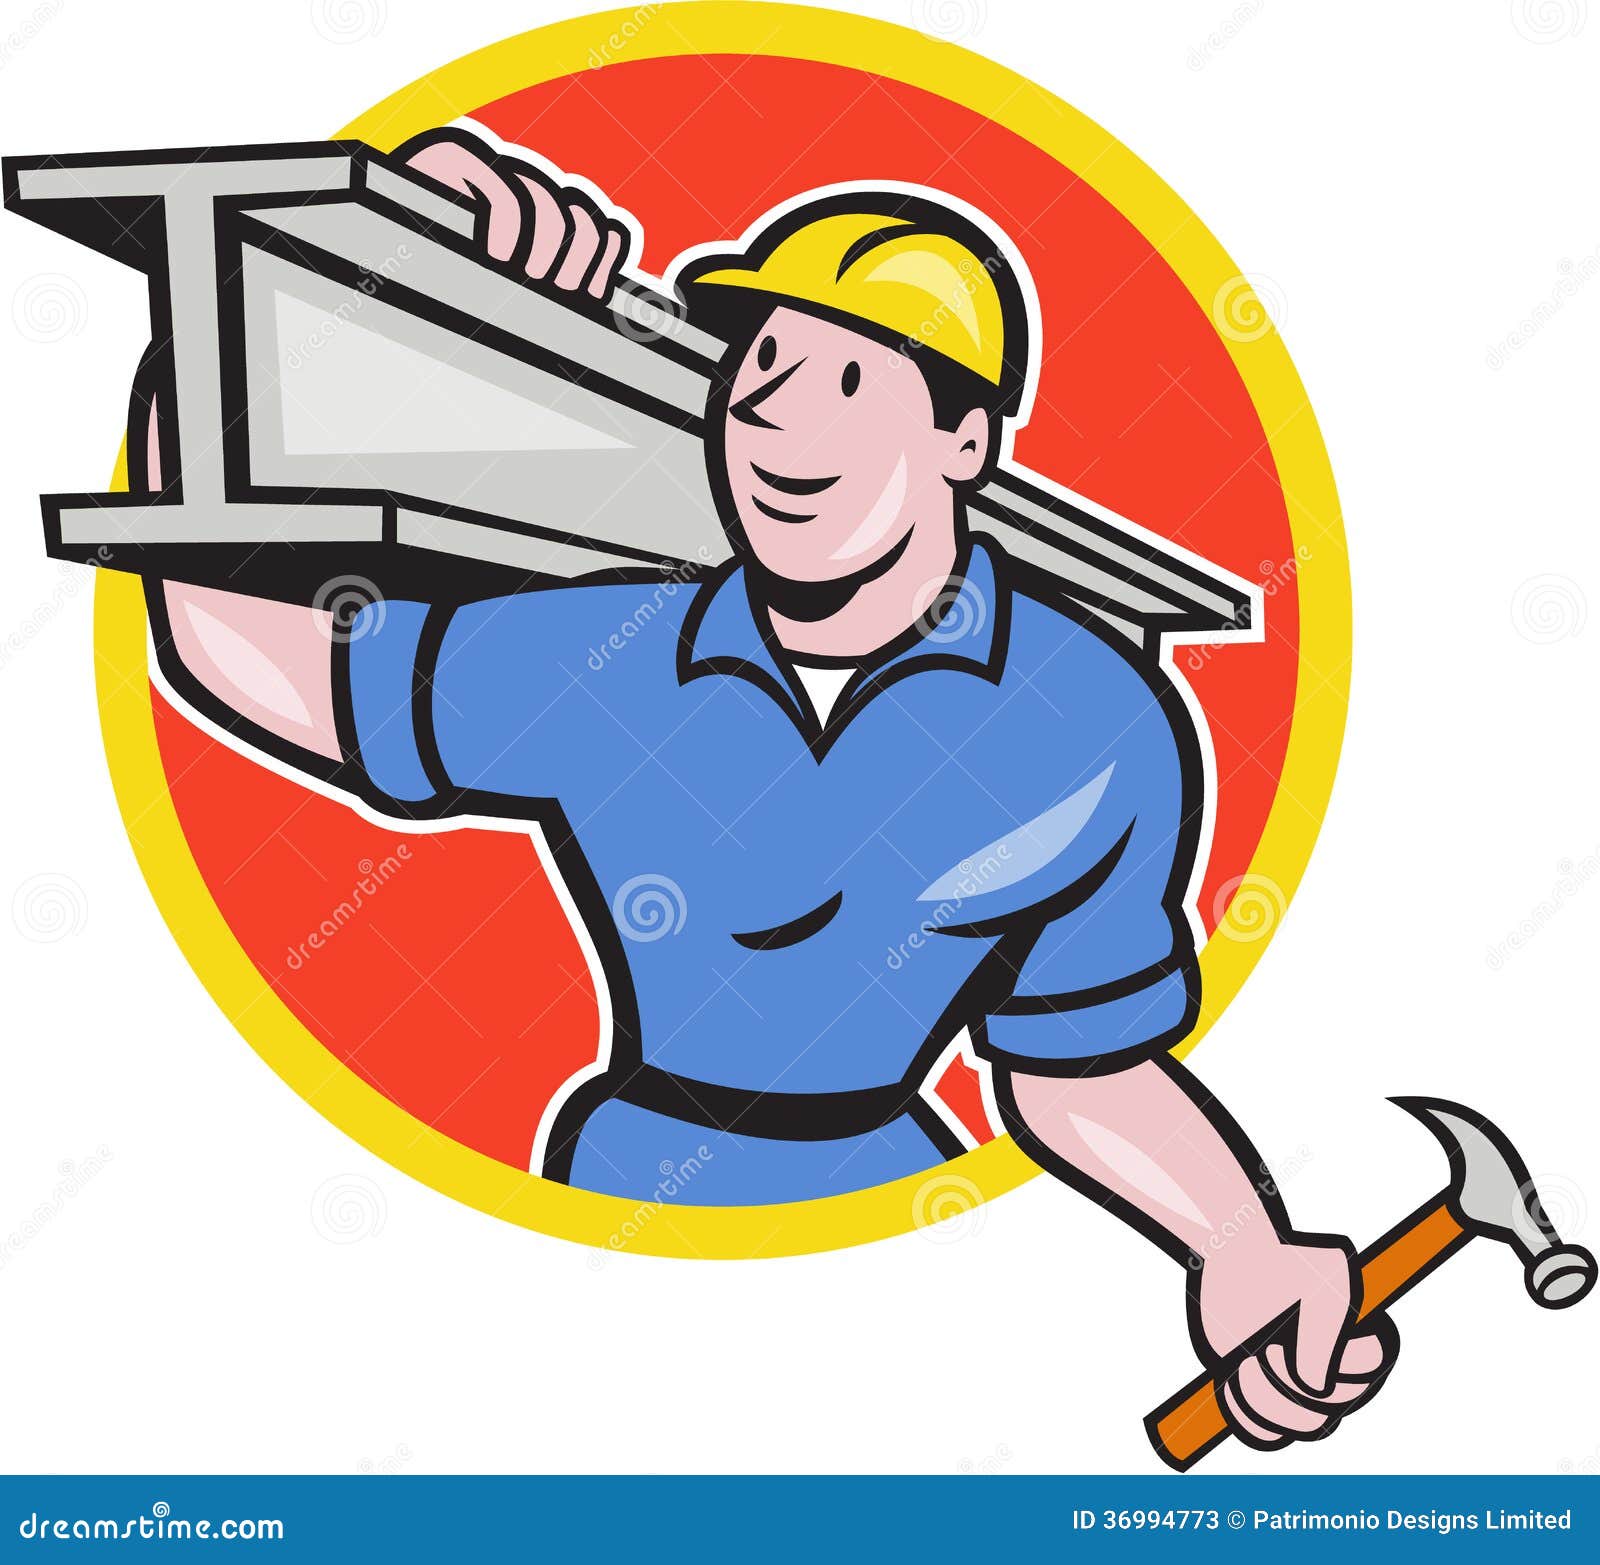 clipart iron worker - photo #25